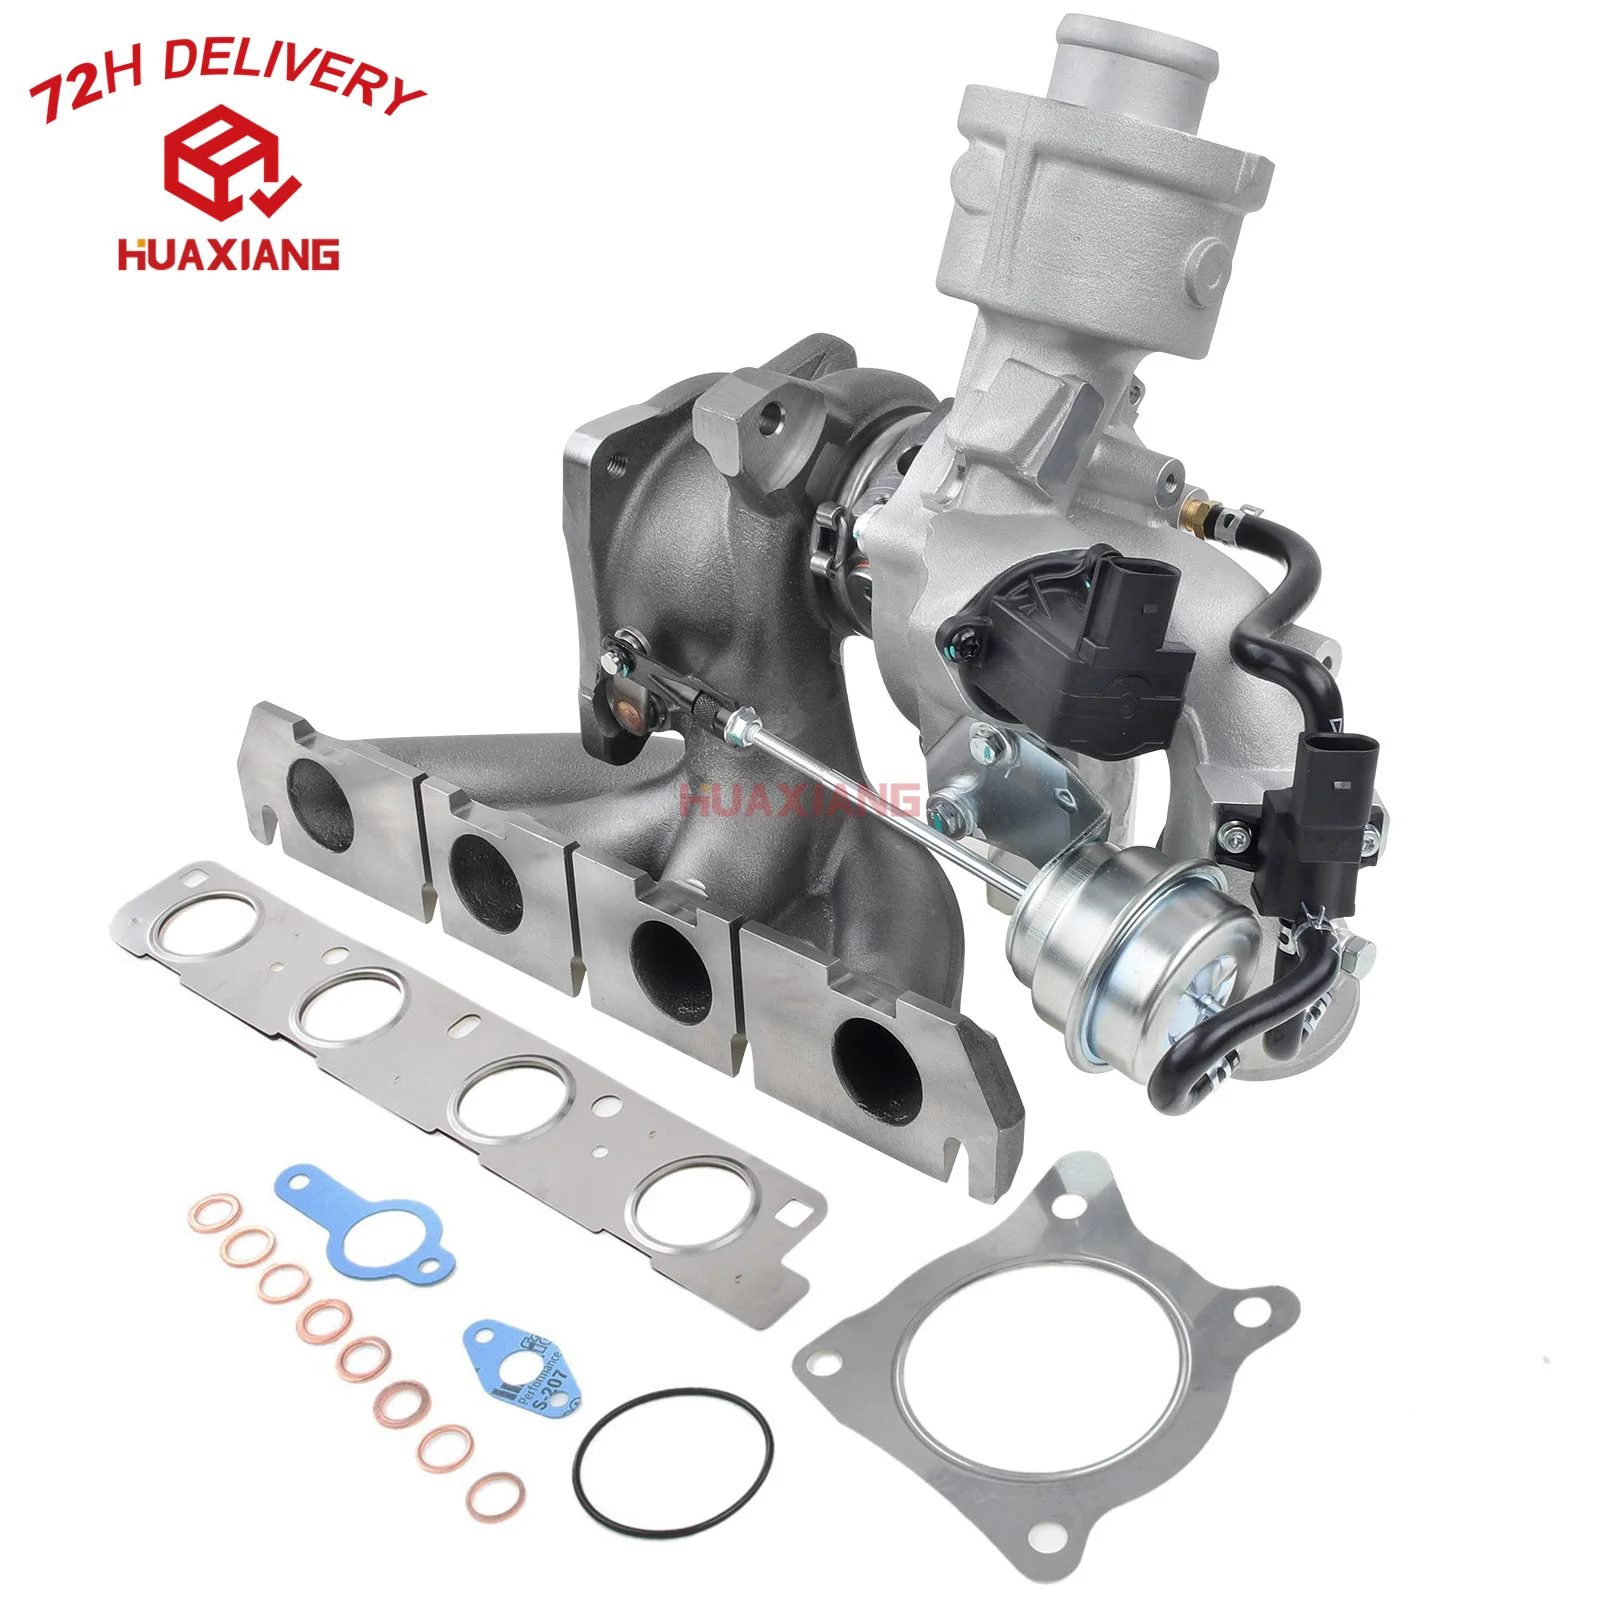 

U.S. 3 Days Delivery Turbo Turbocharger for Audi A3 2008-2013 A4 A4 Quattro 05-09 TT 09-10 2.0L K03